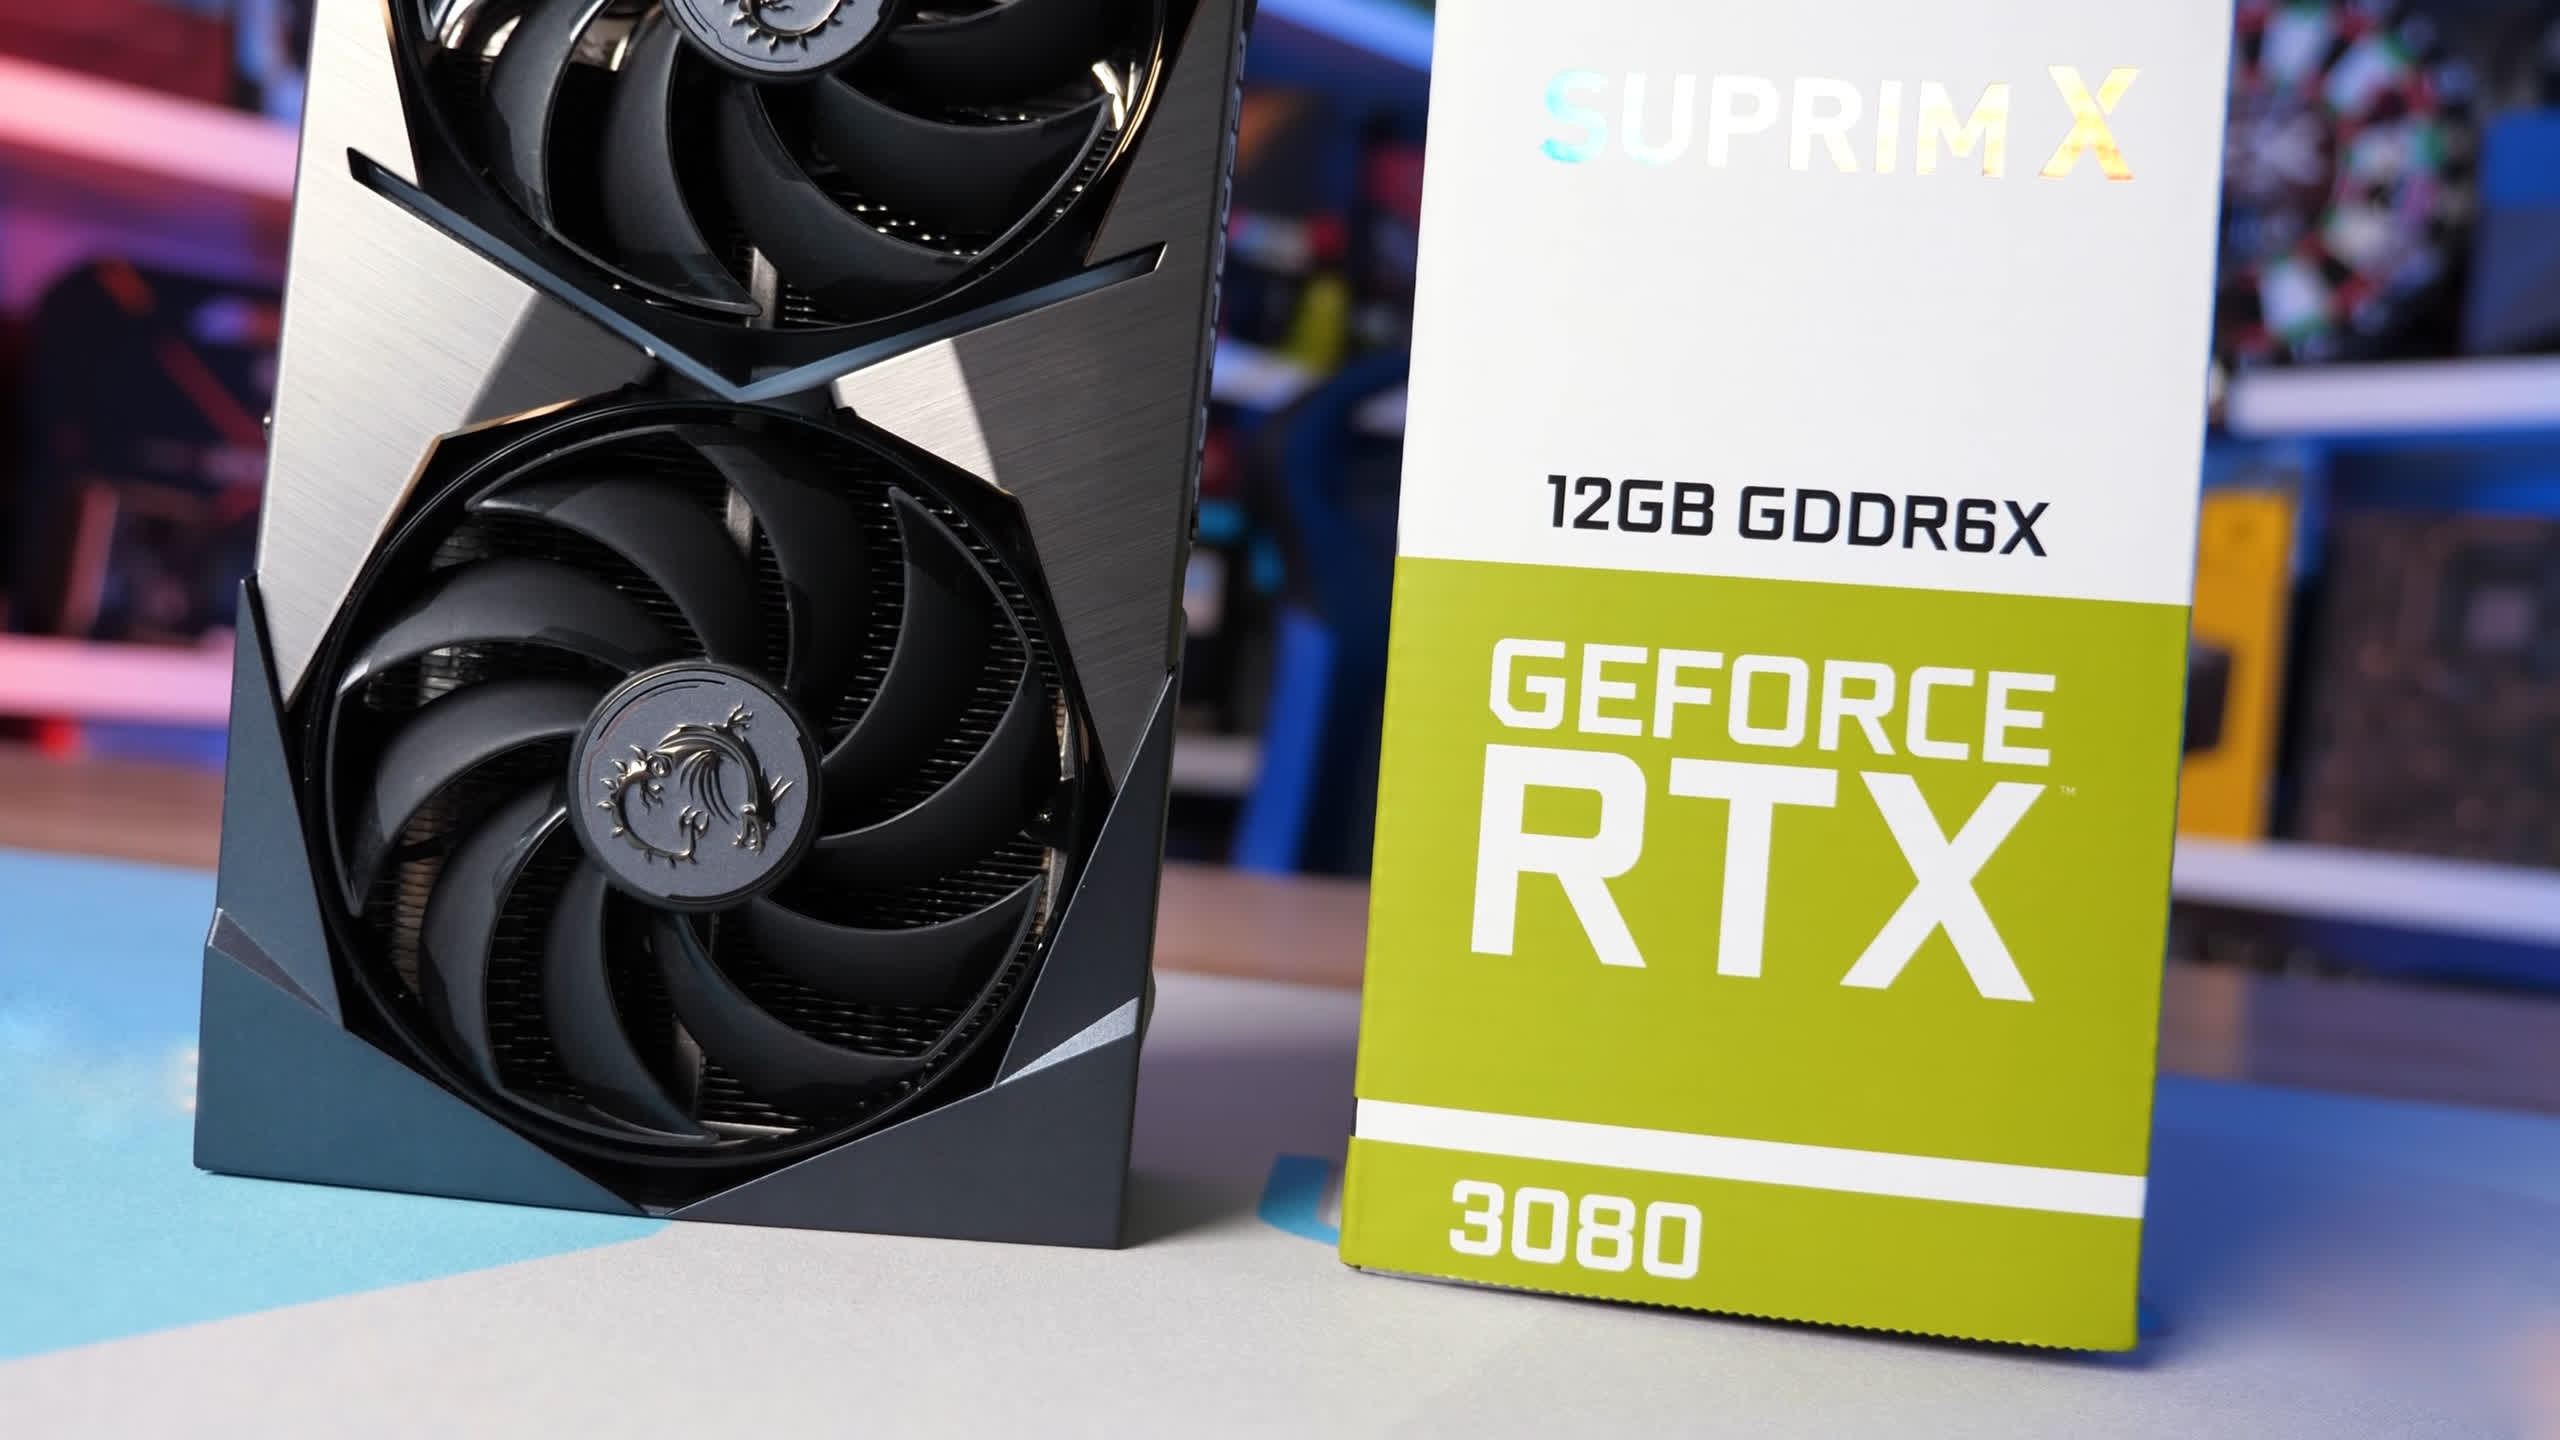 Nvidia might have killed off the RTX 3080 12GB